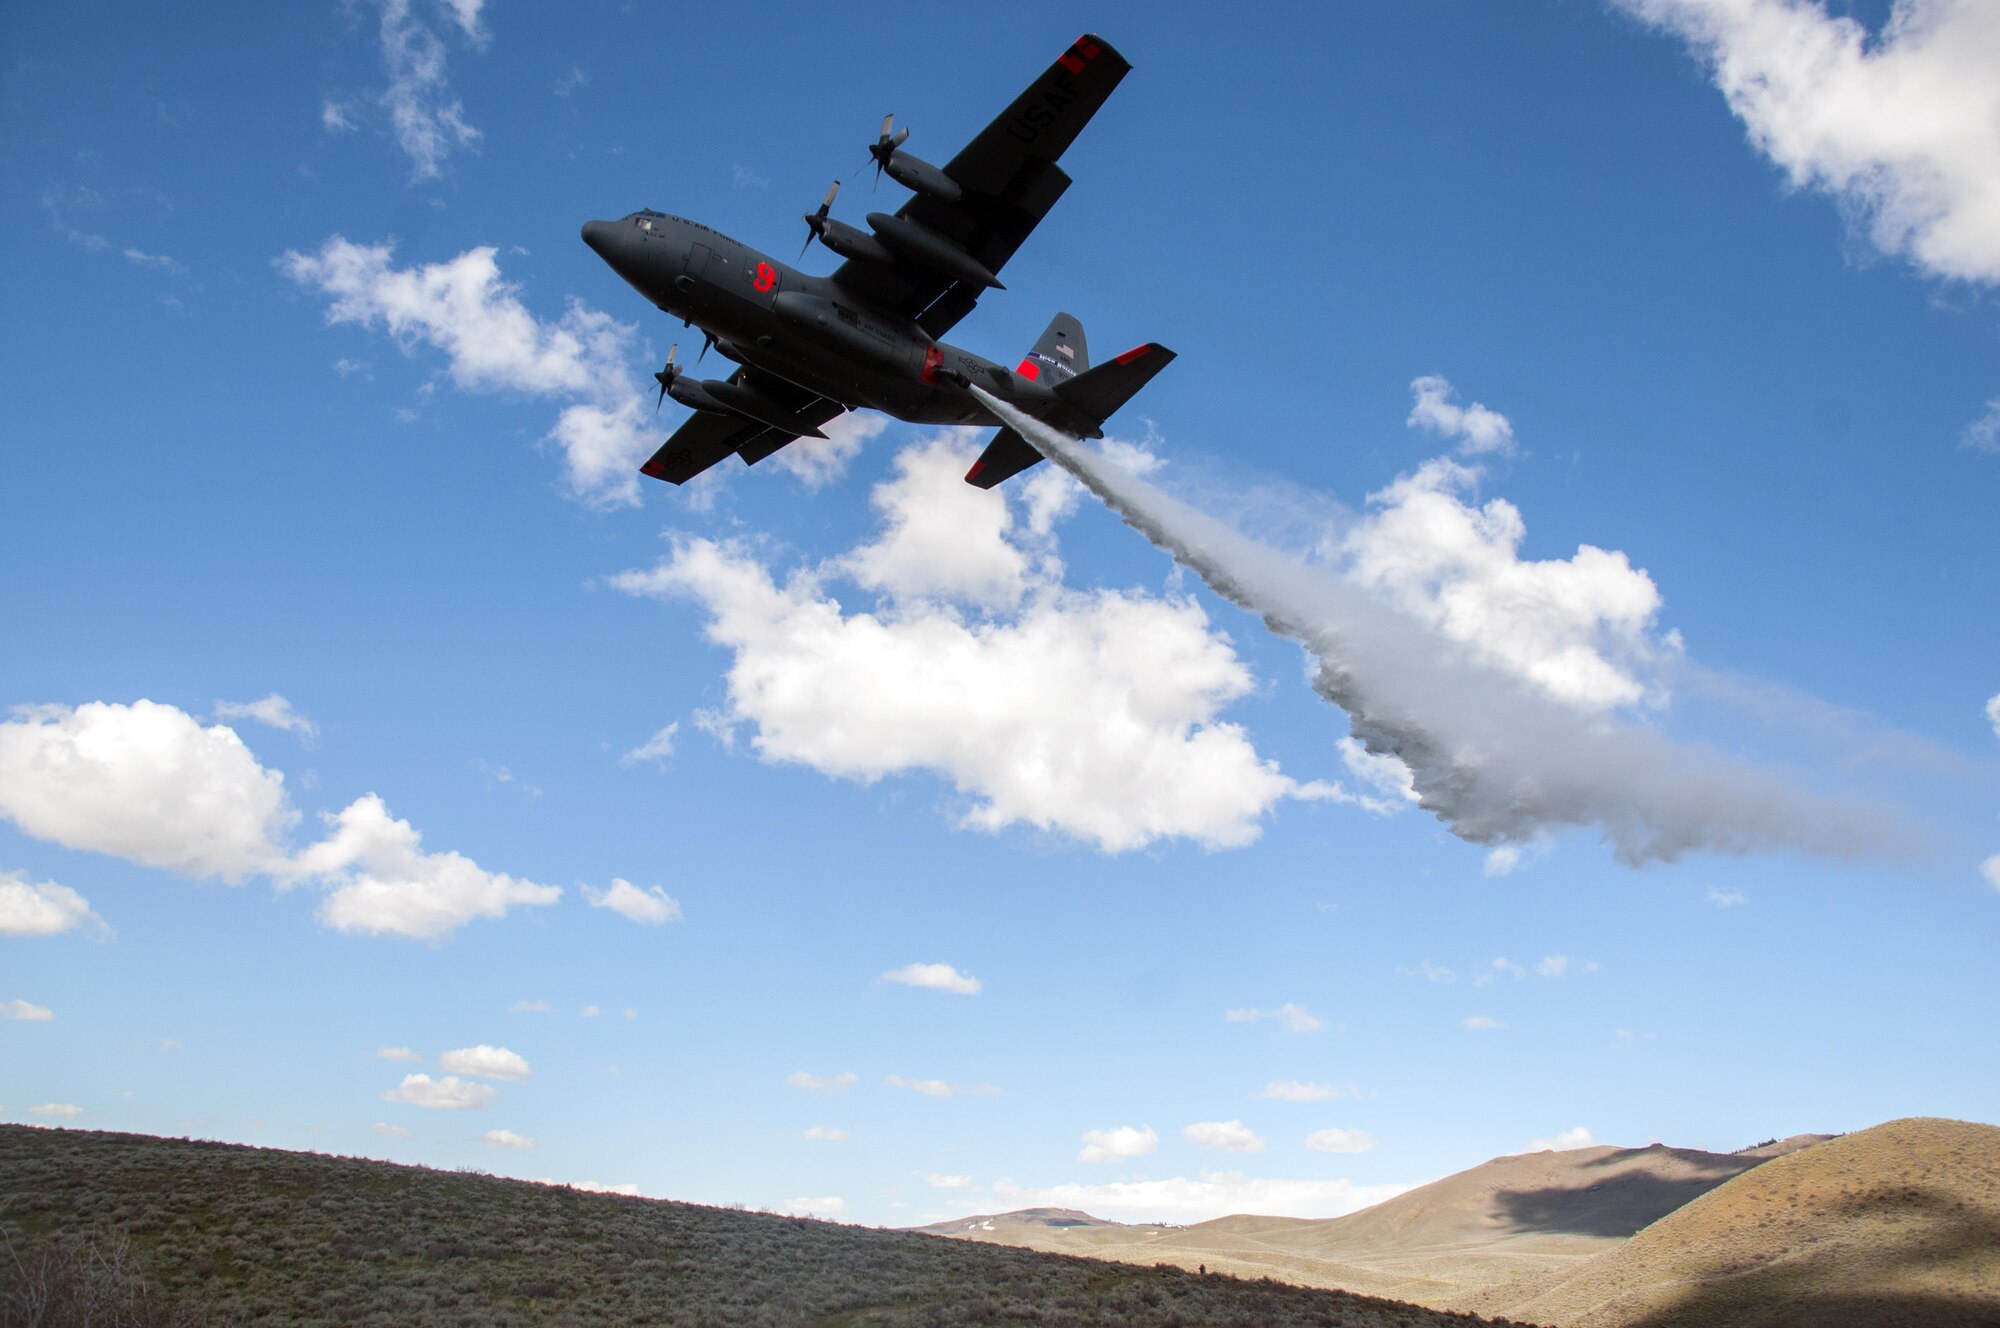 A C-130 with the 152nd Airlift Wing, Nevada Air National Guard, drops water in the mountains east of Boise, Idaho as part of the annual Modular Airborne Fire Fighting System training and certification, April 21, 2017. More than 400 personnel of four C-130 Guard and Reserve units — from California, Colorado, Nevada and Wyoming, making up the Air Expeditionary Group — are in Boise for the week-long wildfire training and certification sponsored by the U.S. Forest Service.